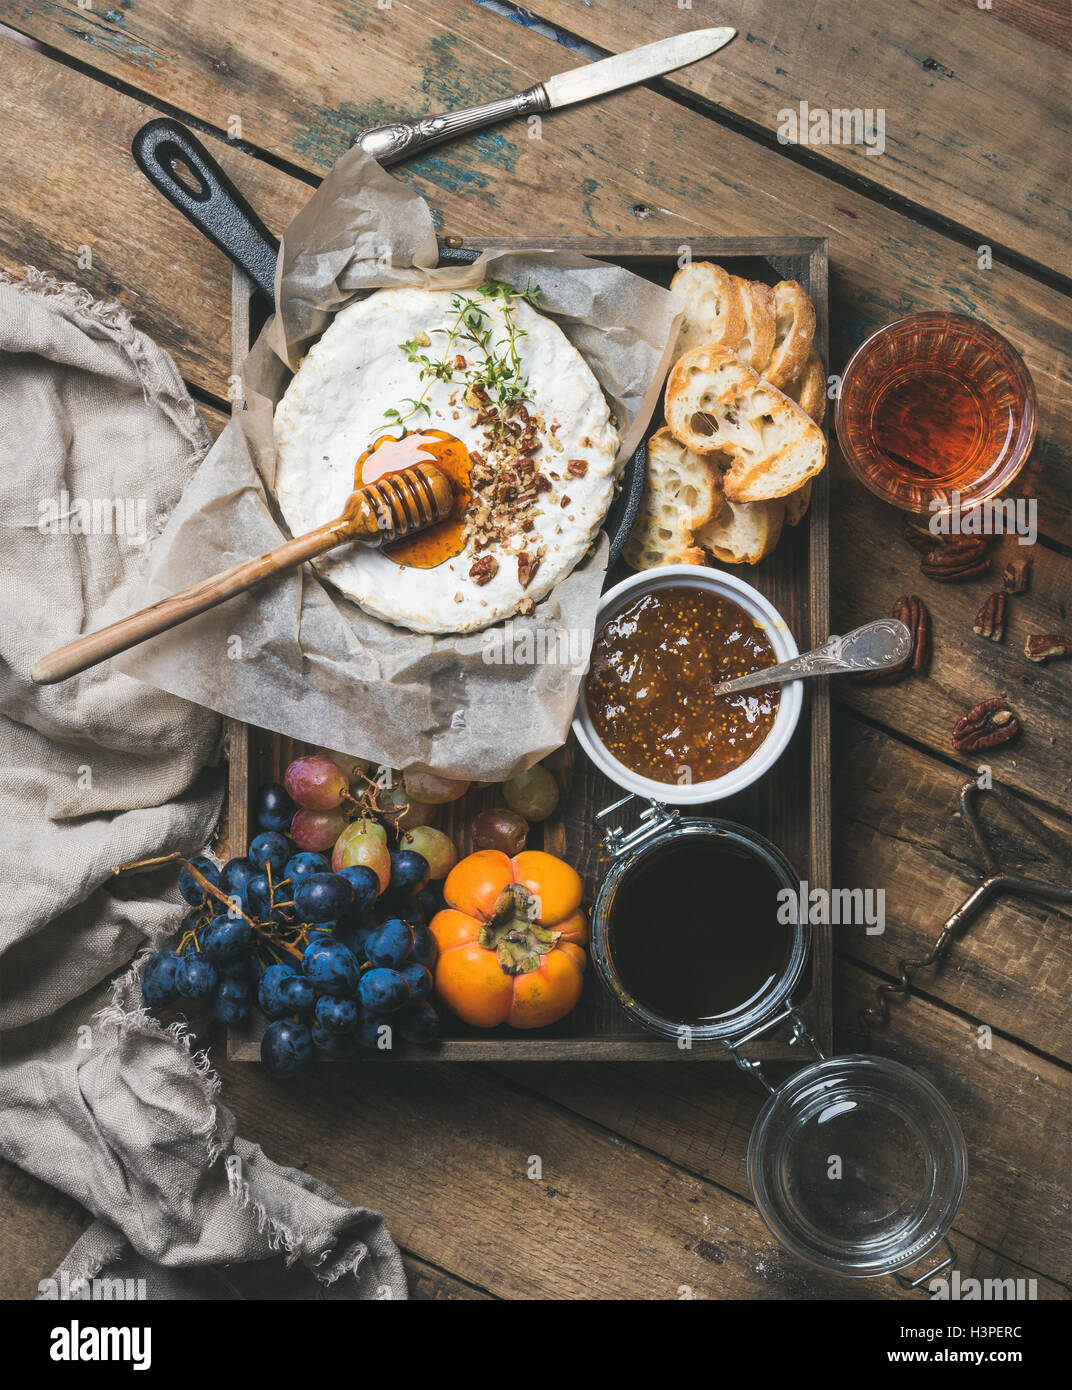 Camambert with honey, nuts, herbs, fruits and rose wine Stock Photo